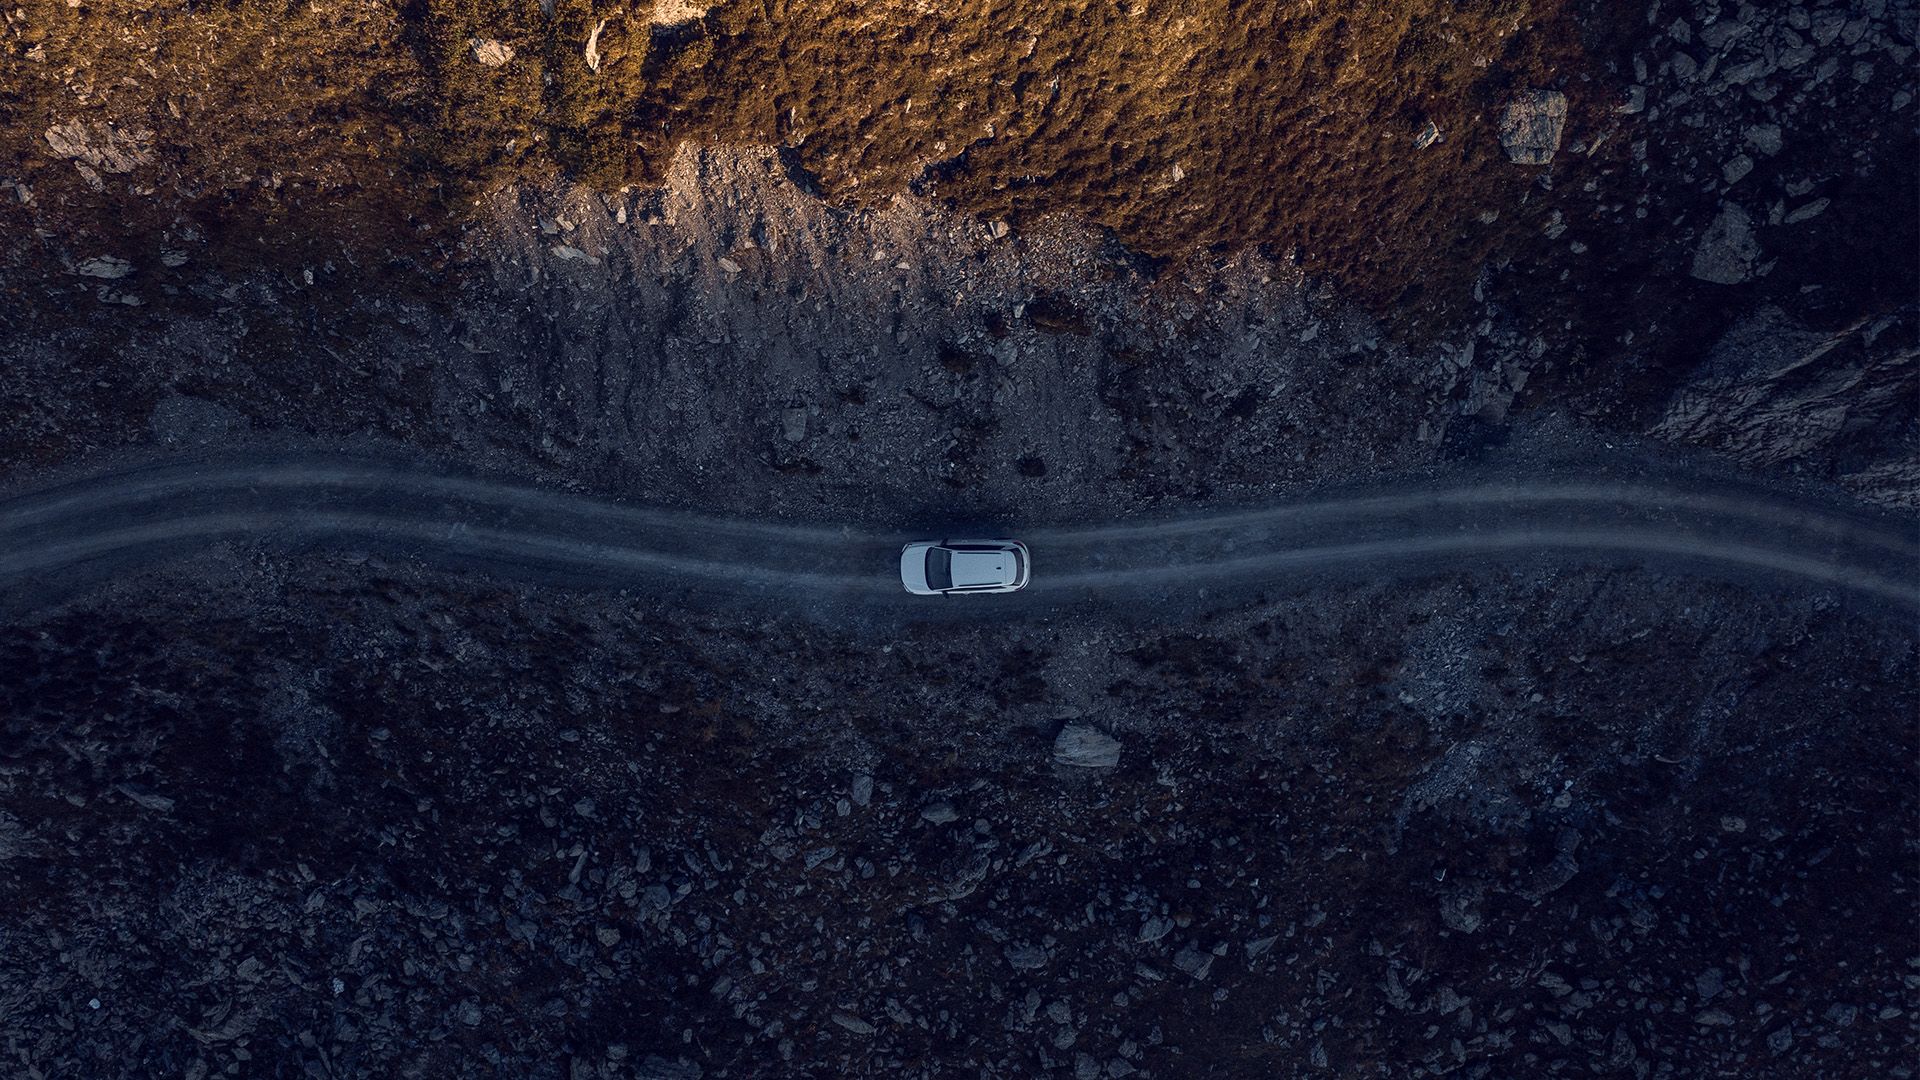 A drone image from above shows a white car on a road in the mountains.